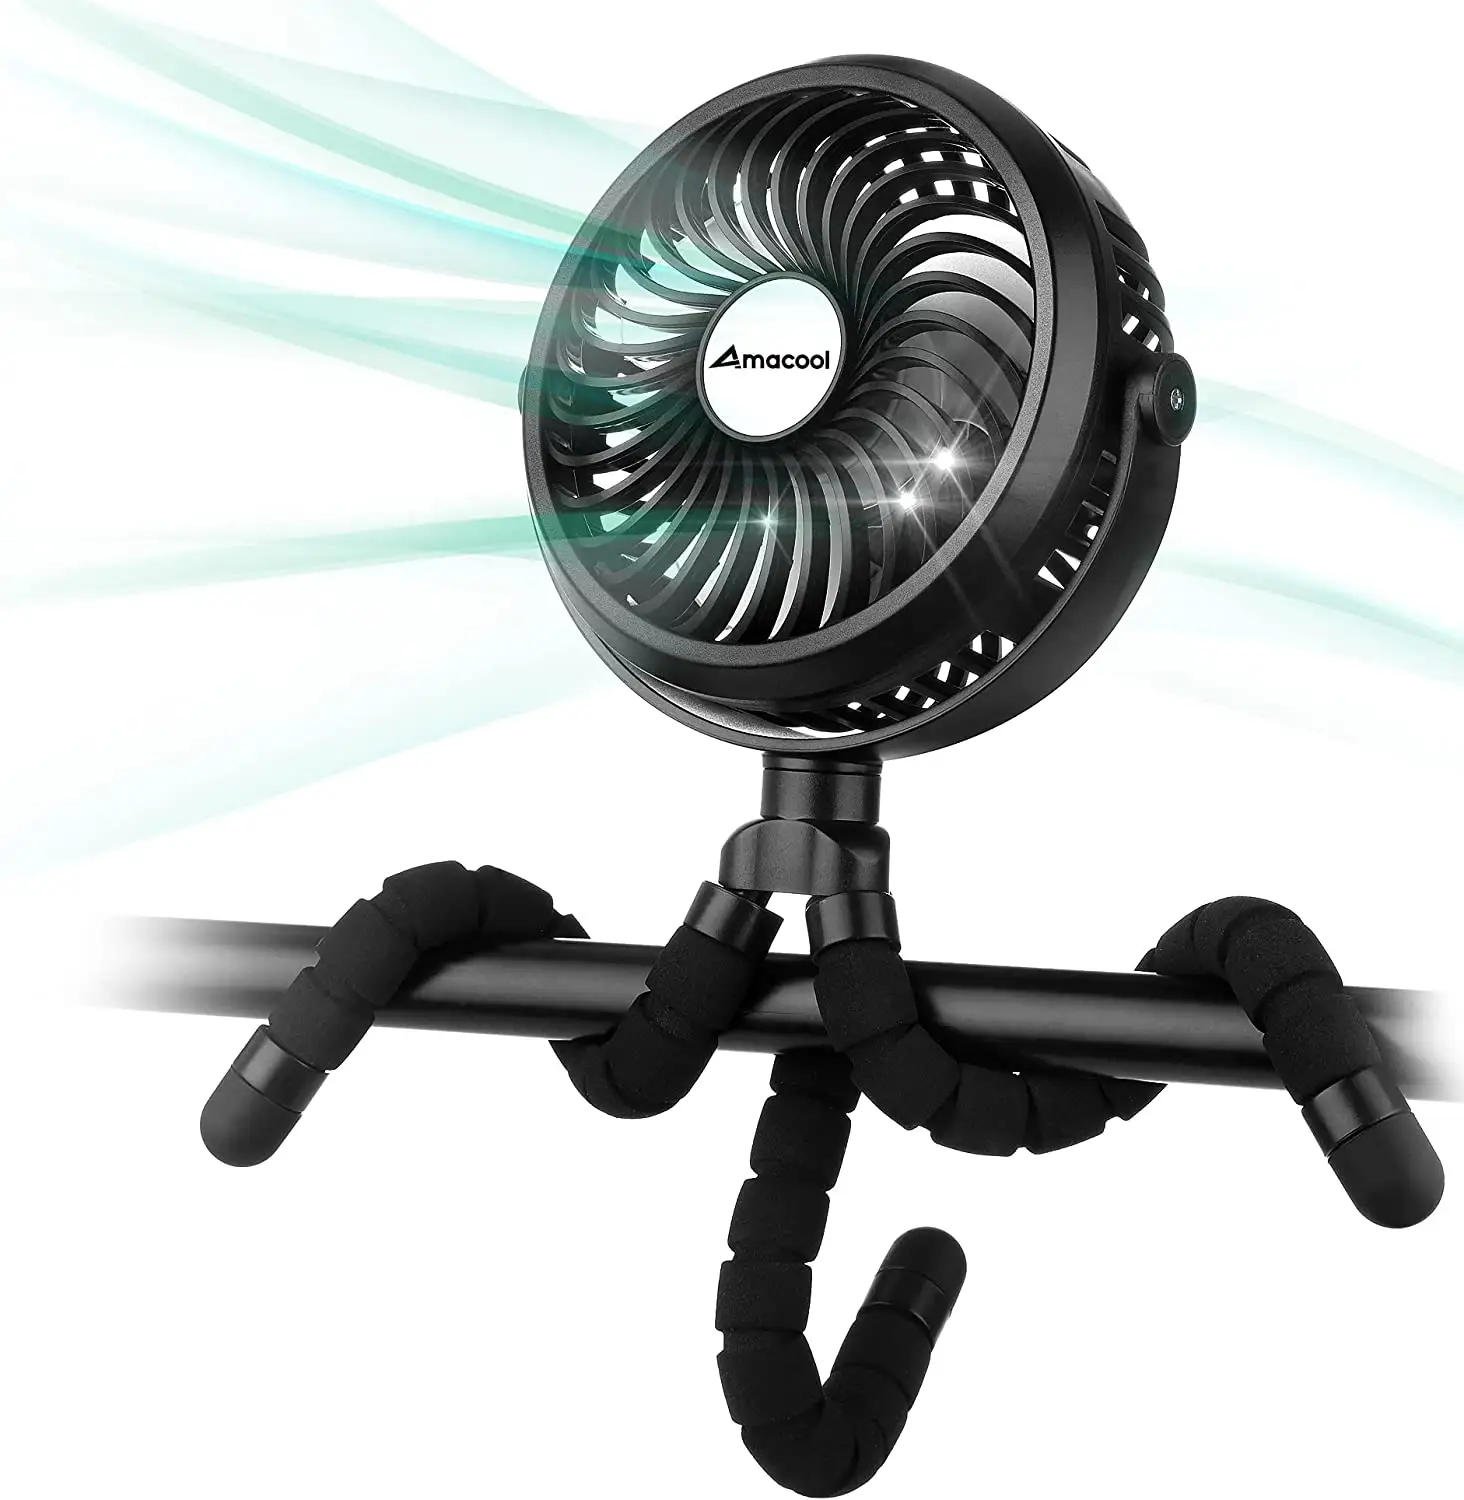 AMACOOL Battery Operated Stroller Fan Flexible Tripod Clip On Fan with 3 Speeds and Rotatable Handheld Personal Fan